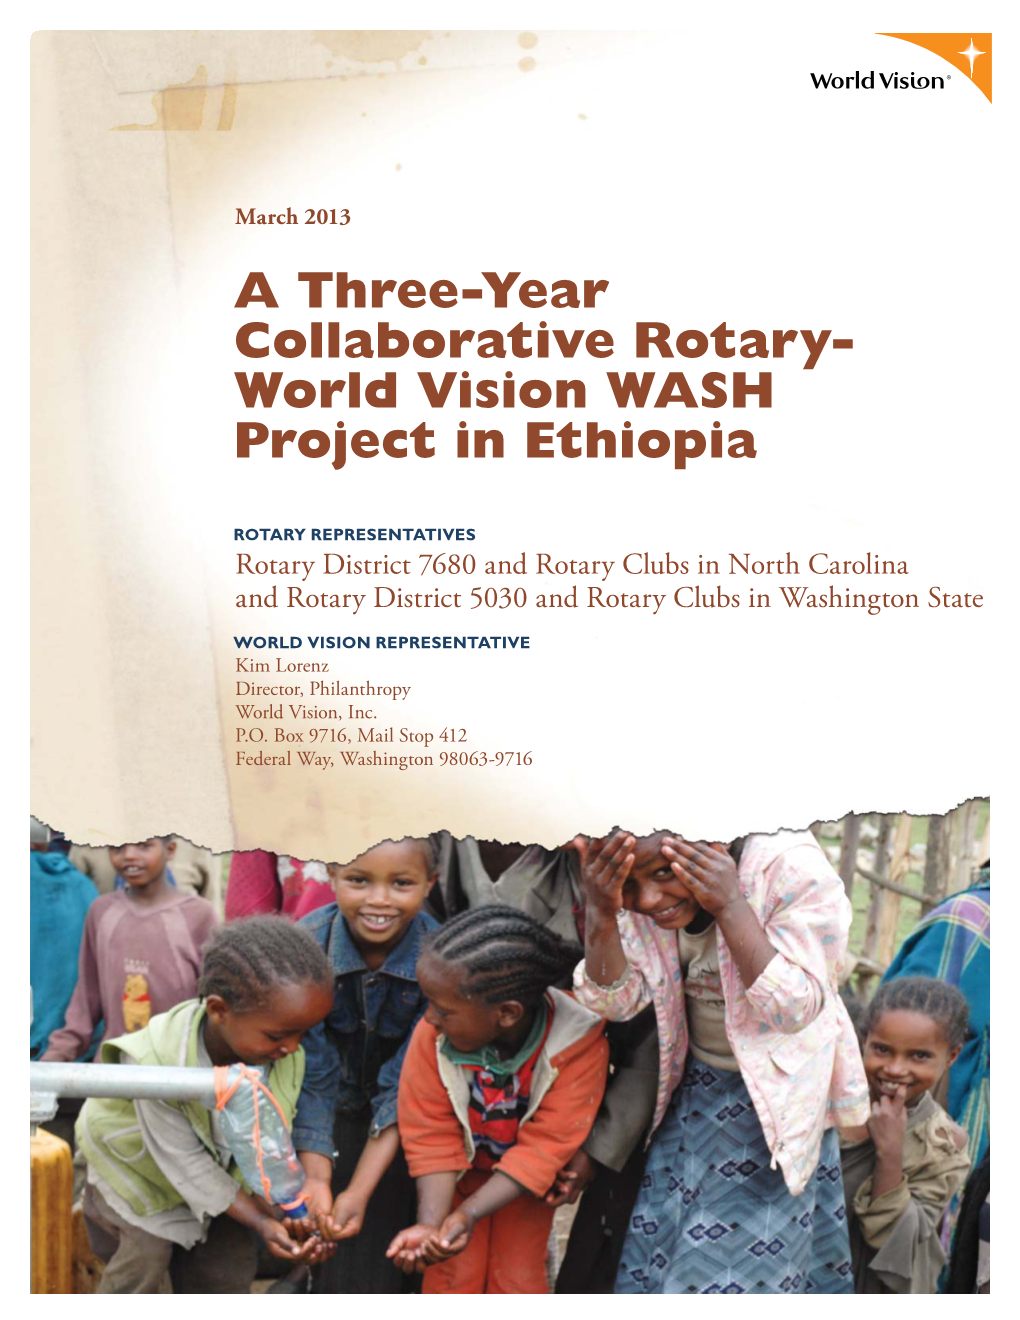 A Three-Year Collaborative Rotary- World Vision WASH Project in Ethiopia